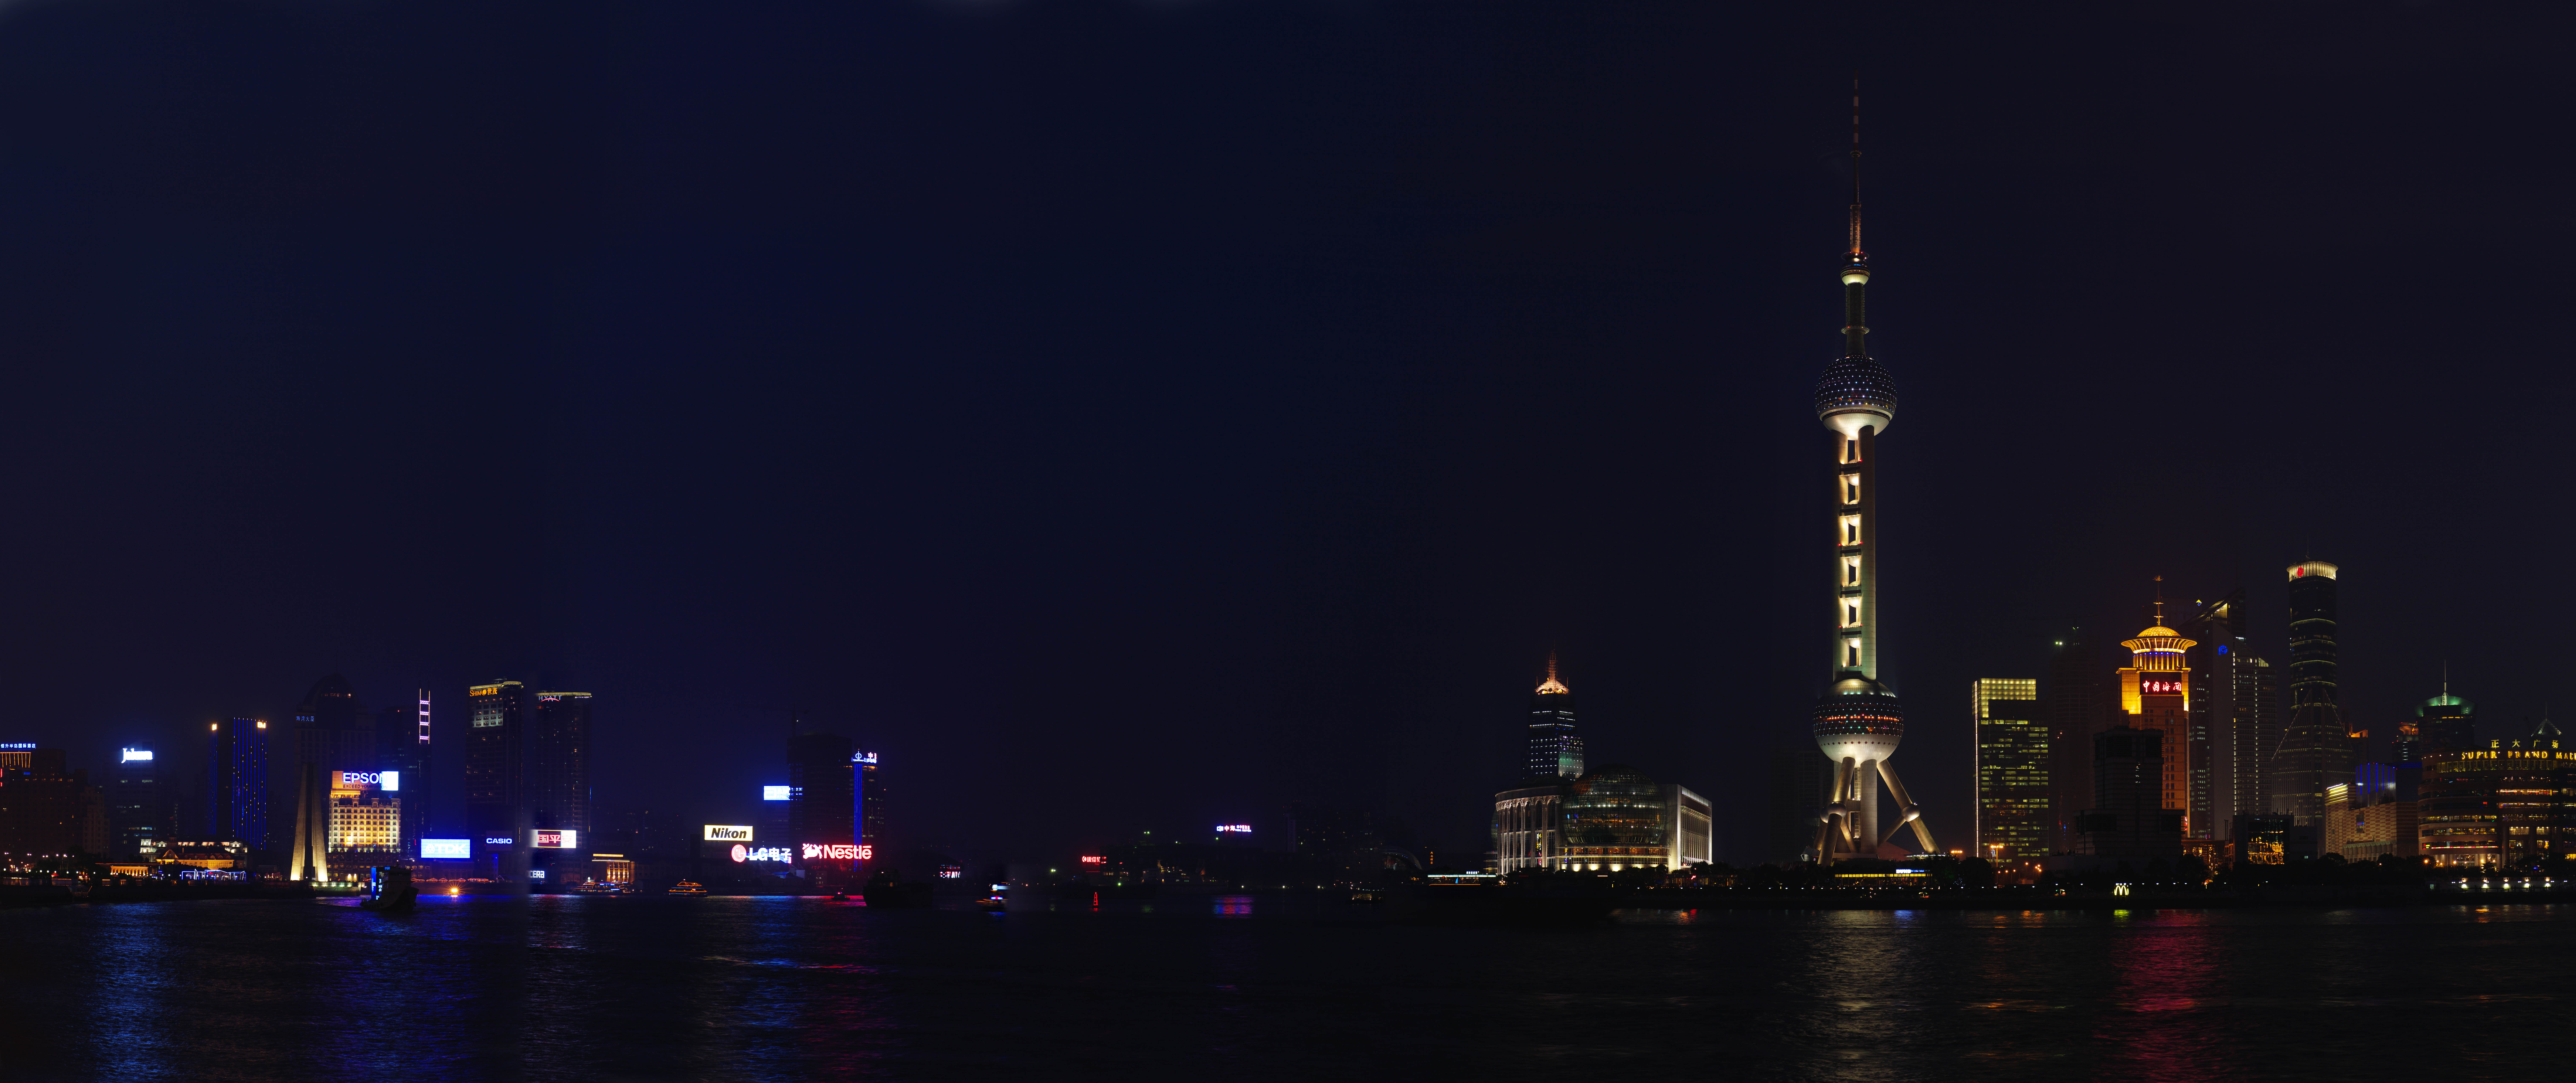 photo,material,free,landscape,picture,stock photo,Creative Commons,A night view of Huangpu Jiang, East light ball tower, I light it up, Illumination, ship